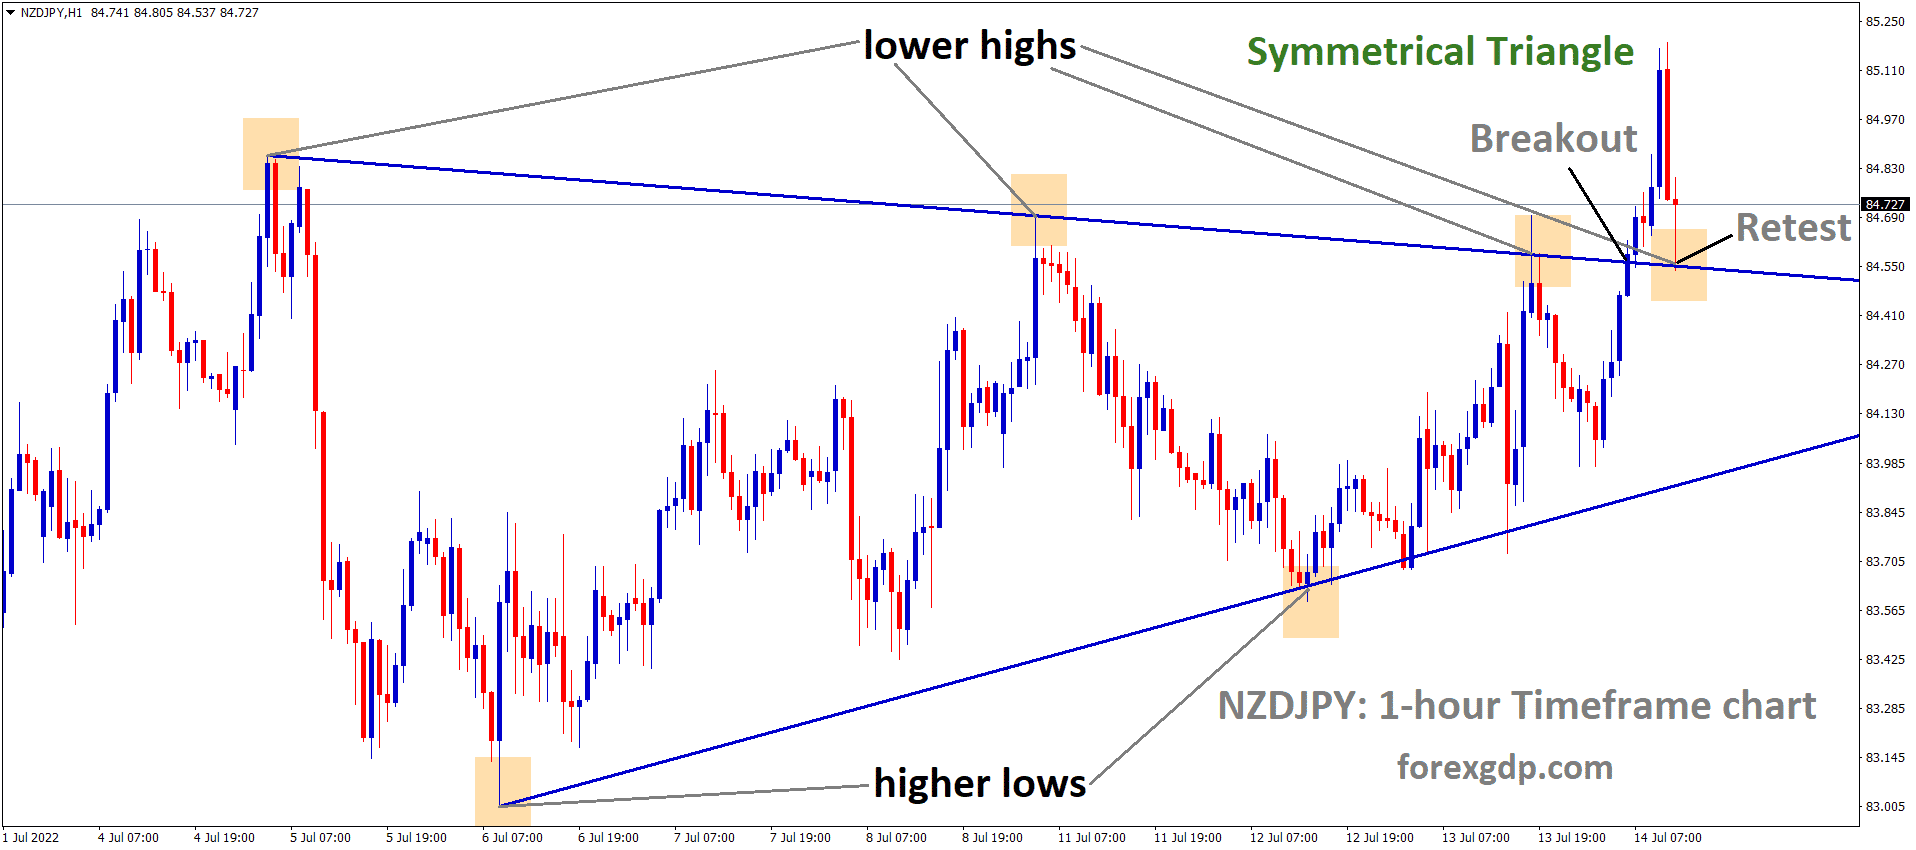 NZDJPY has broken the Symmetrical triangle pattern and the market has retested the broken area of the triangle pattern.